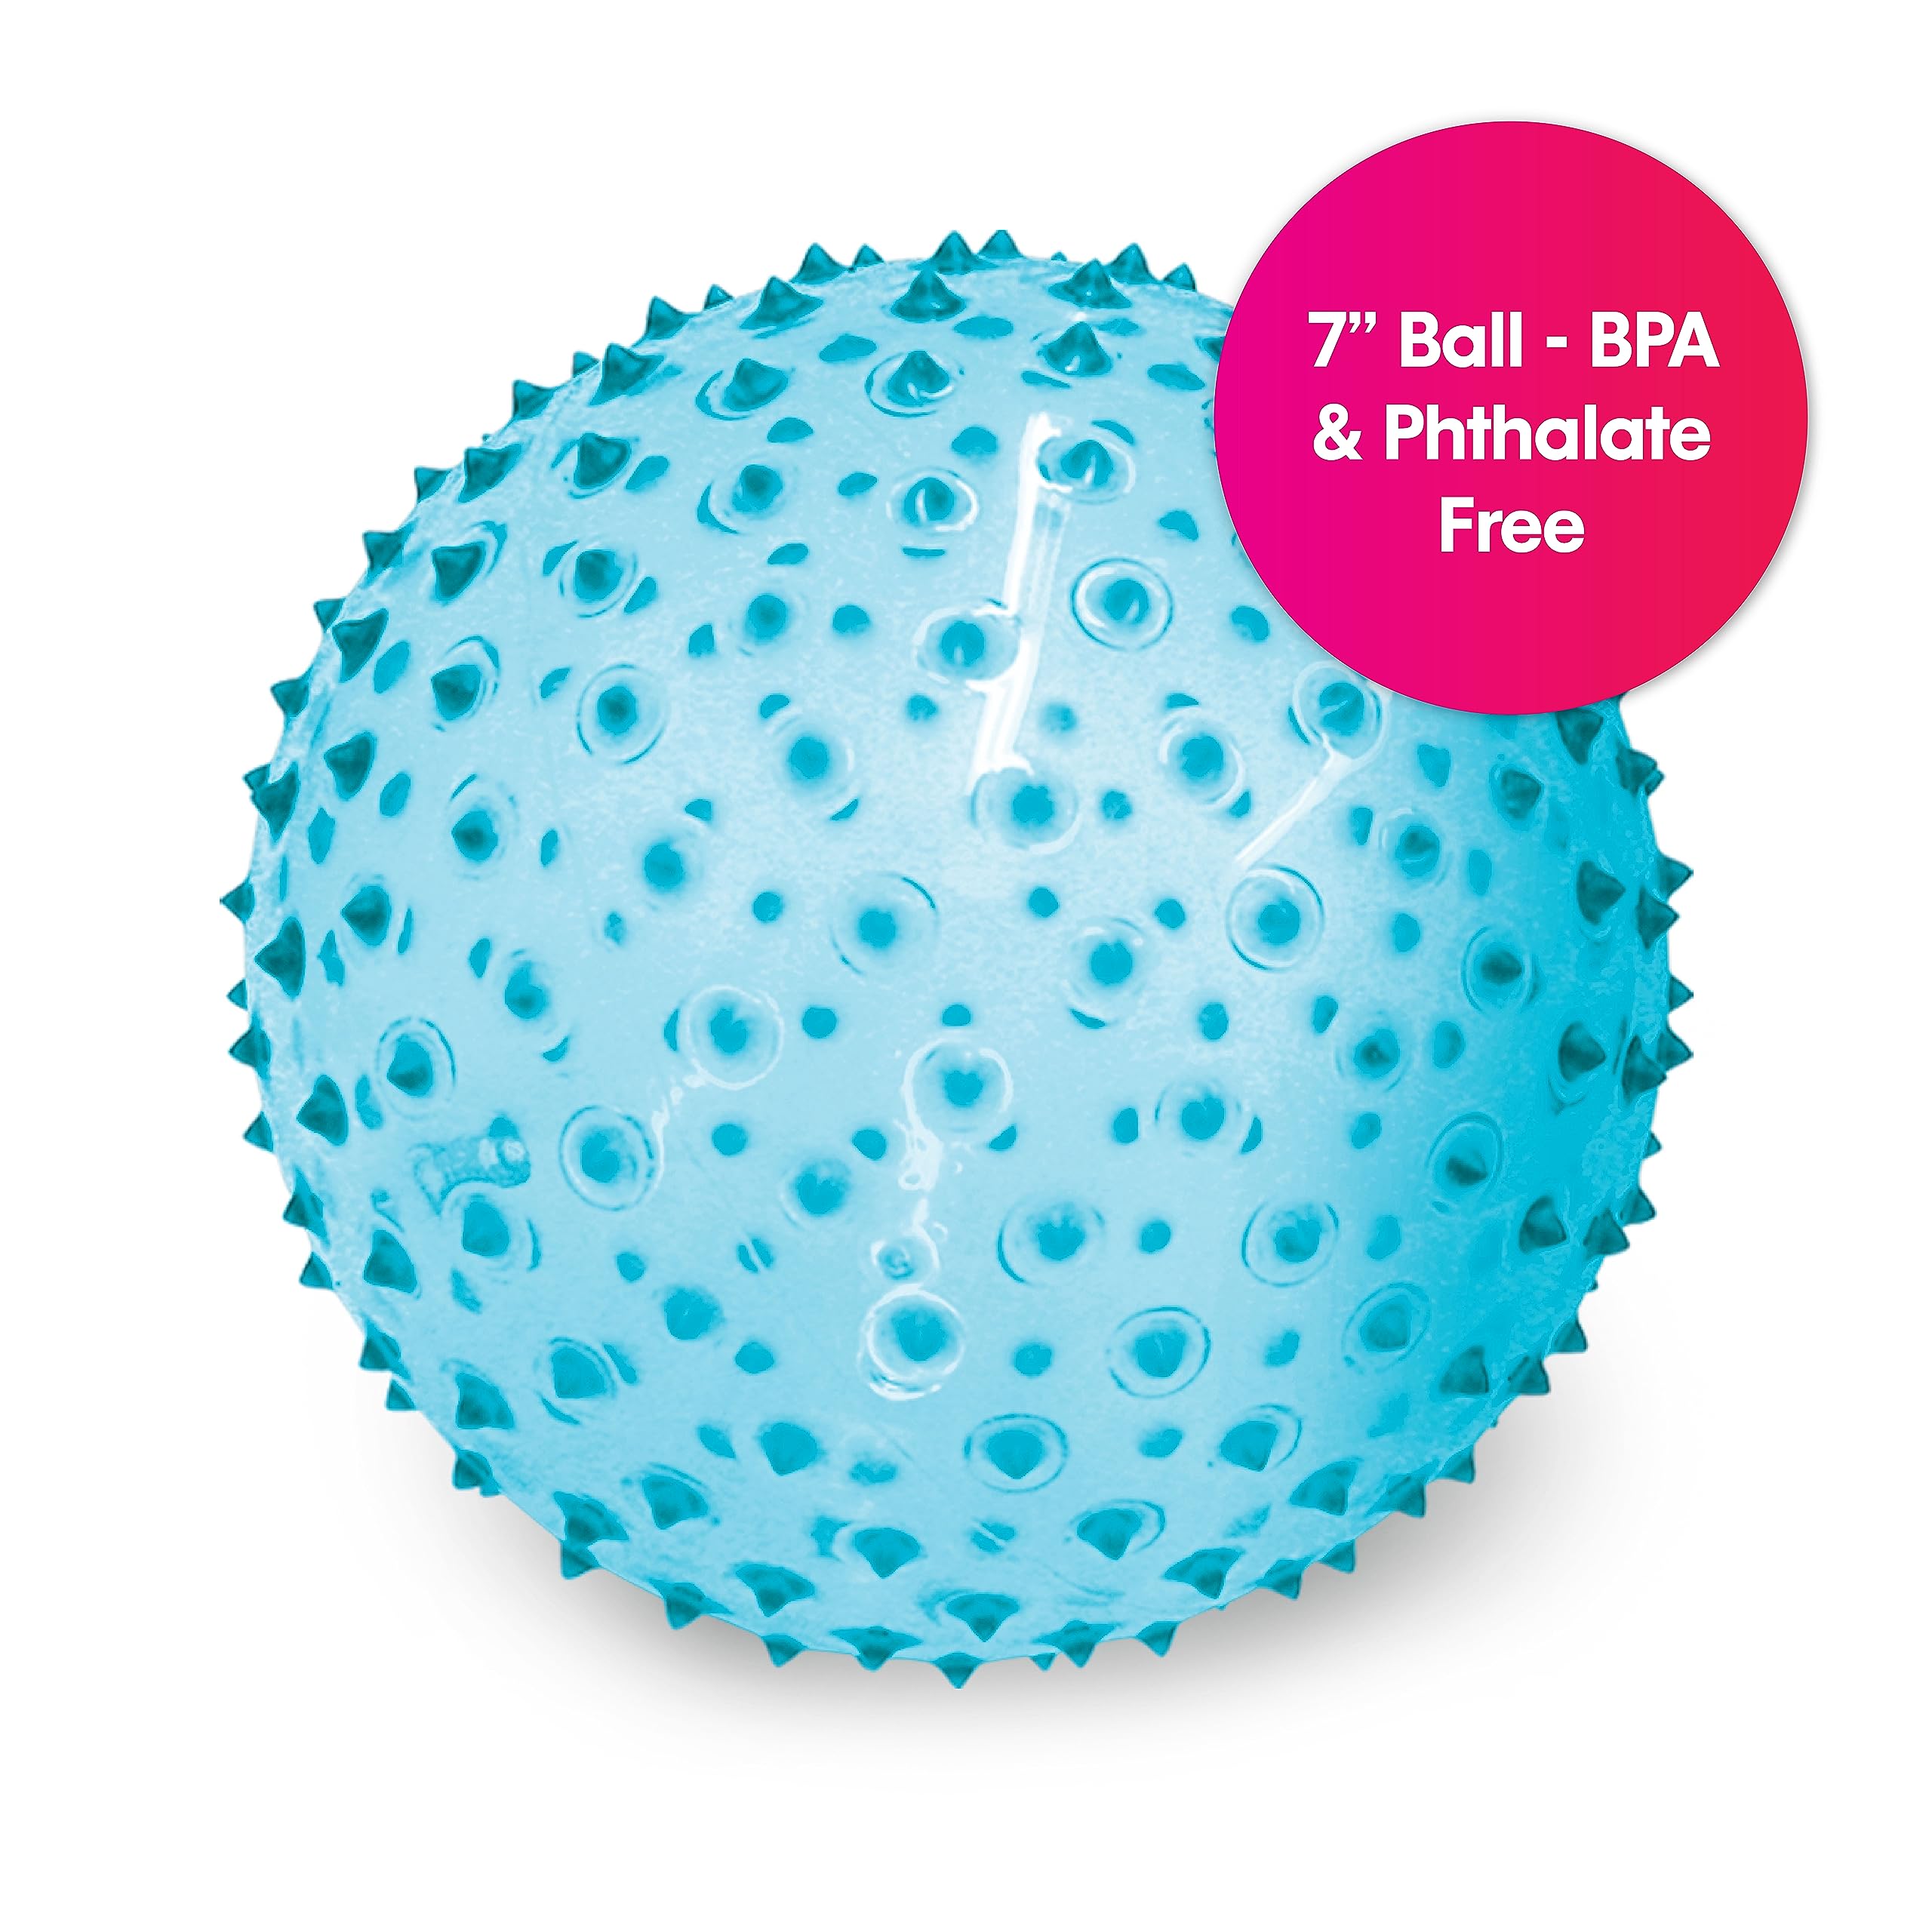 Edushape The Original Sensory Ball for Baby - 7” Transparent Trendy Color Baby Ball That Helps Enhance Gross Motor Skills for Kids Aged 6 Months & Up - Pack of 1 Vibrant & Unique Toddler Ball for Baby